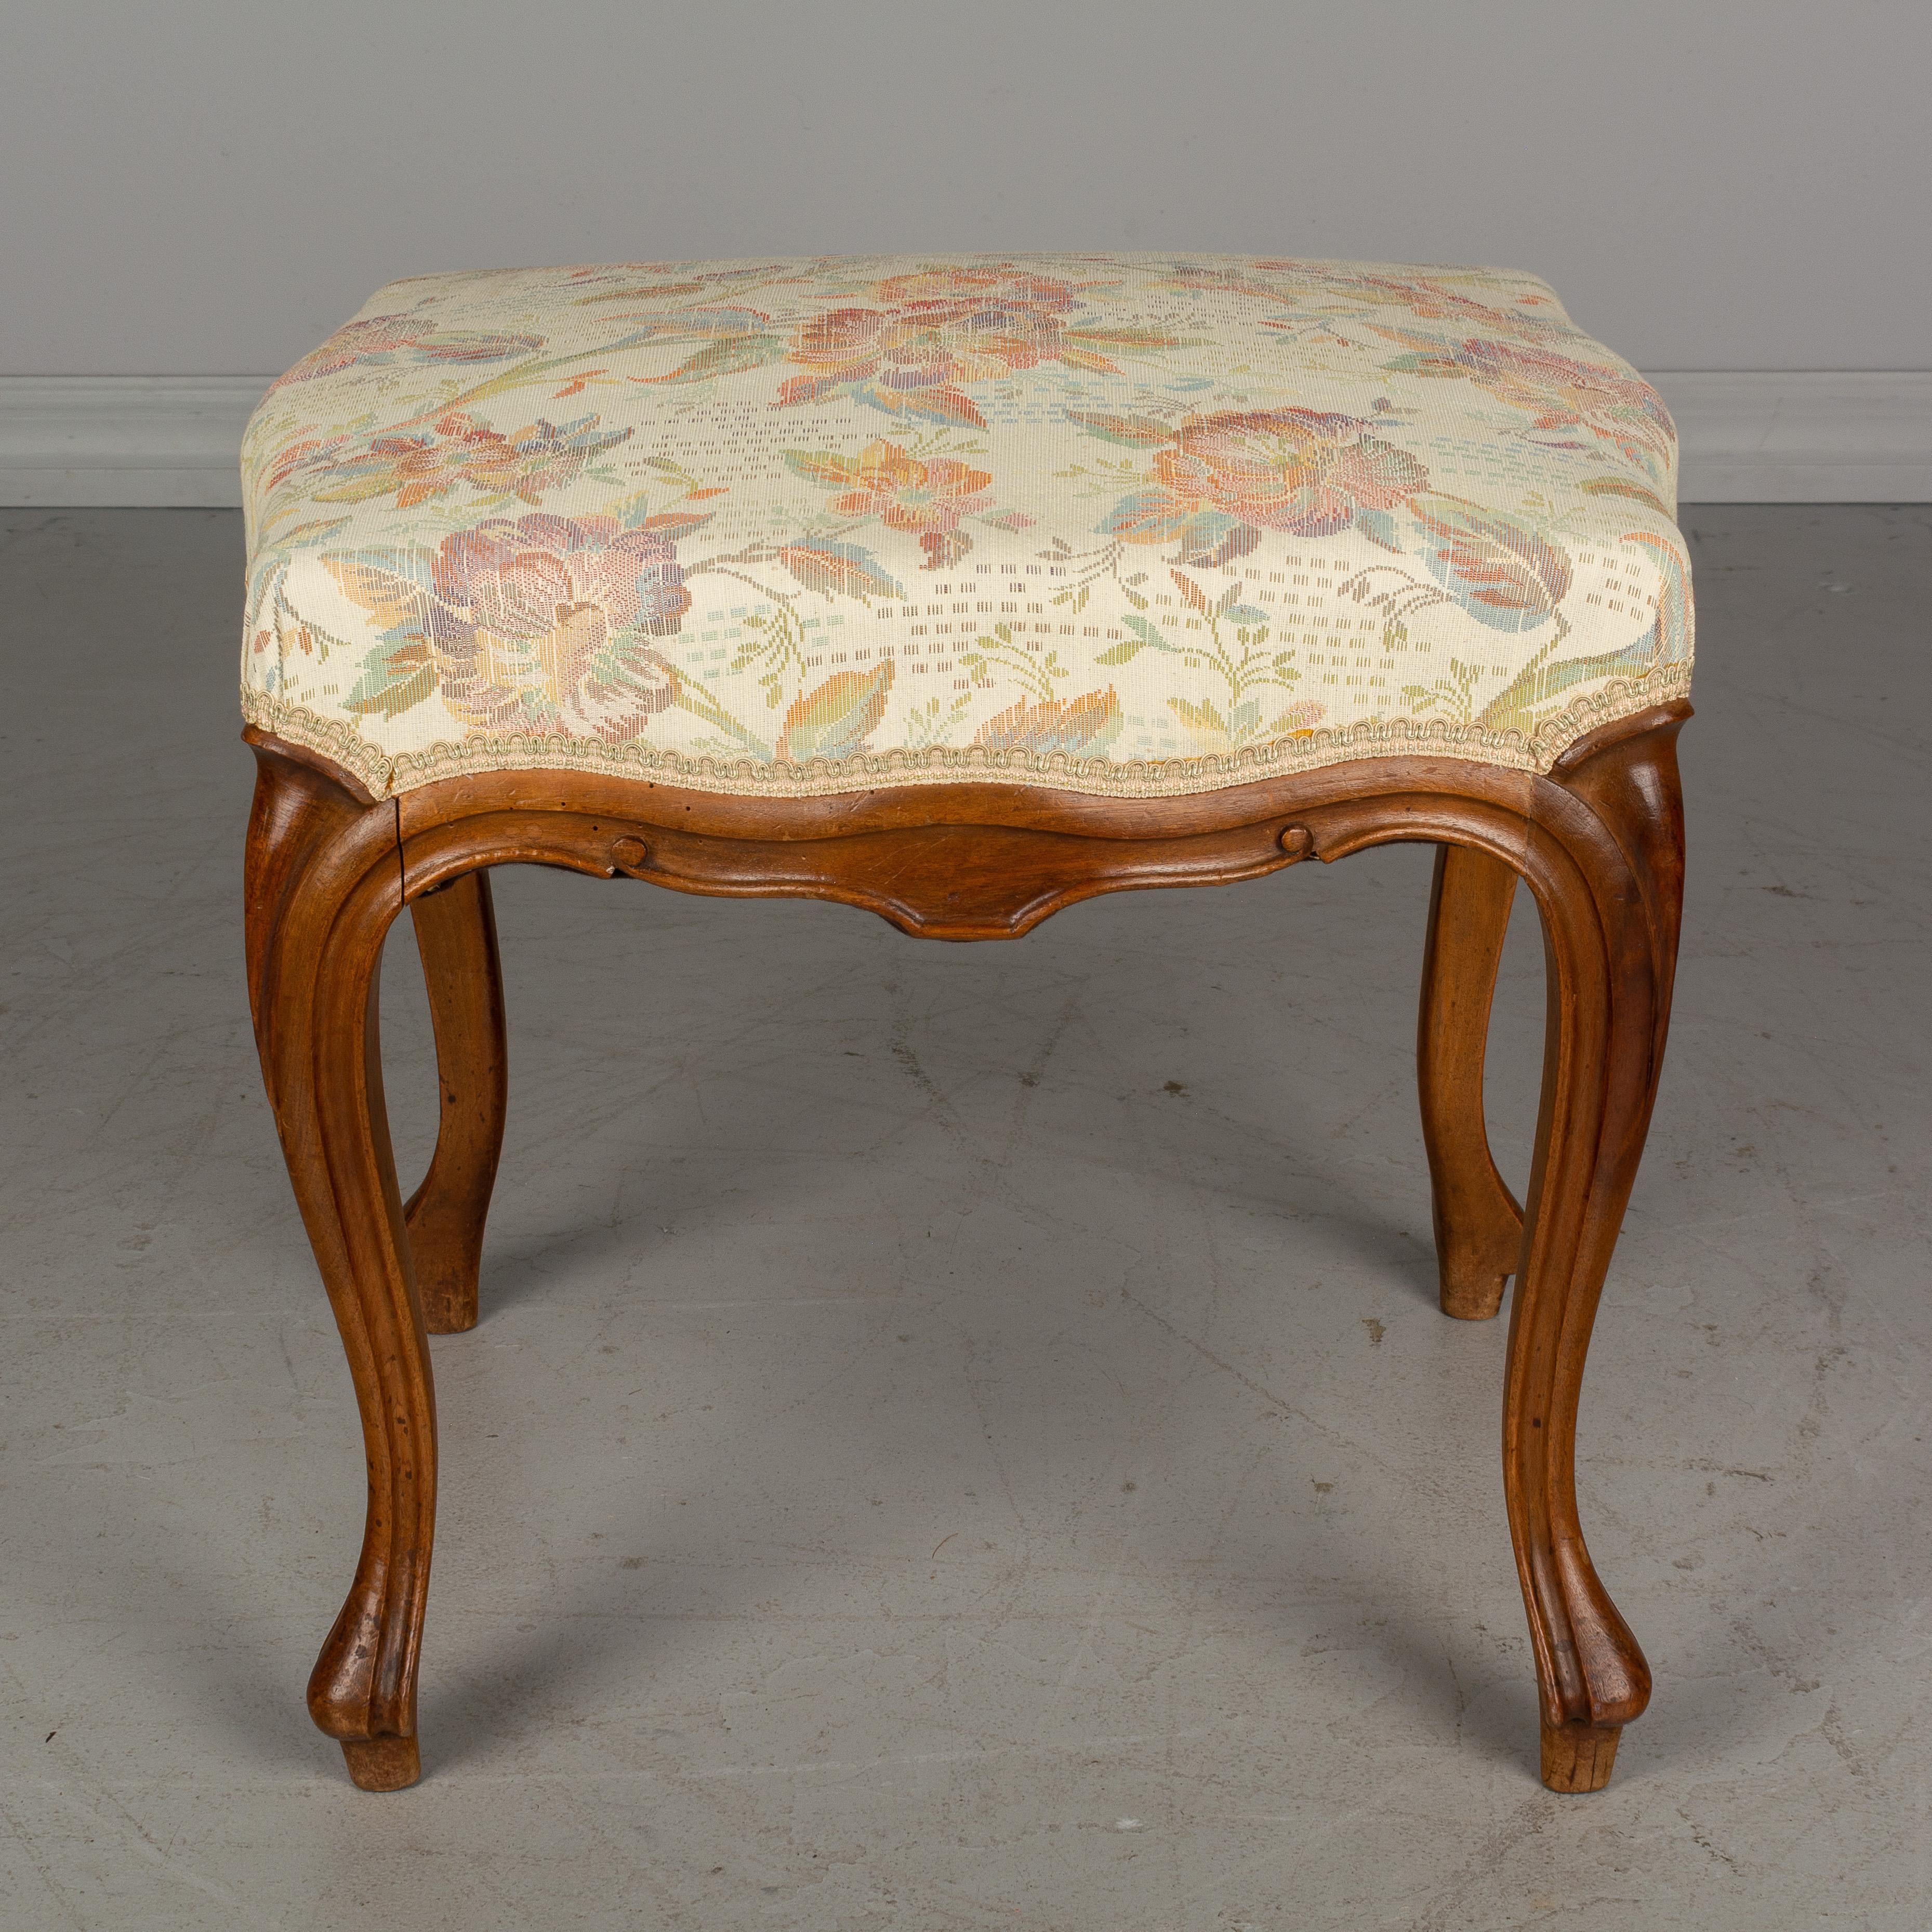 Hand-Crafted French Louis XV Style Foot Stool or Bench